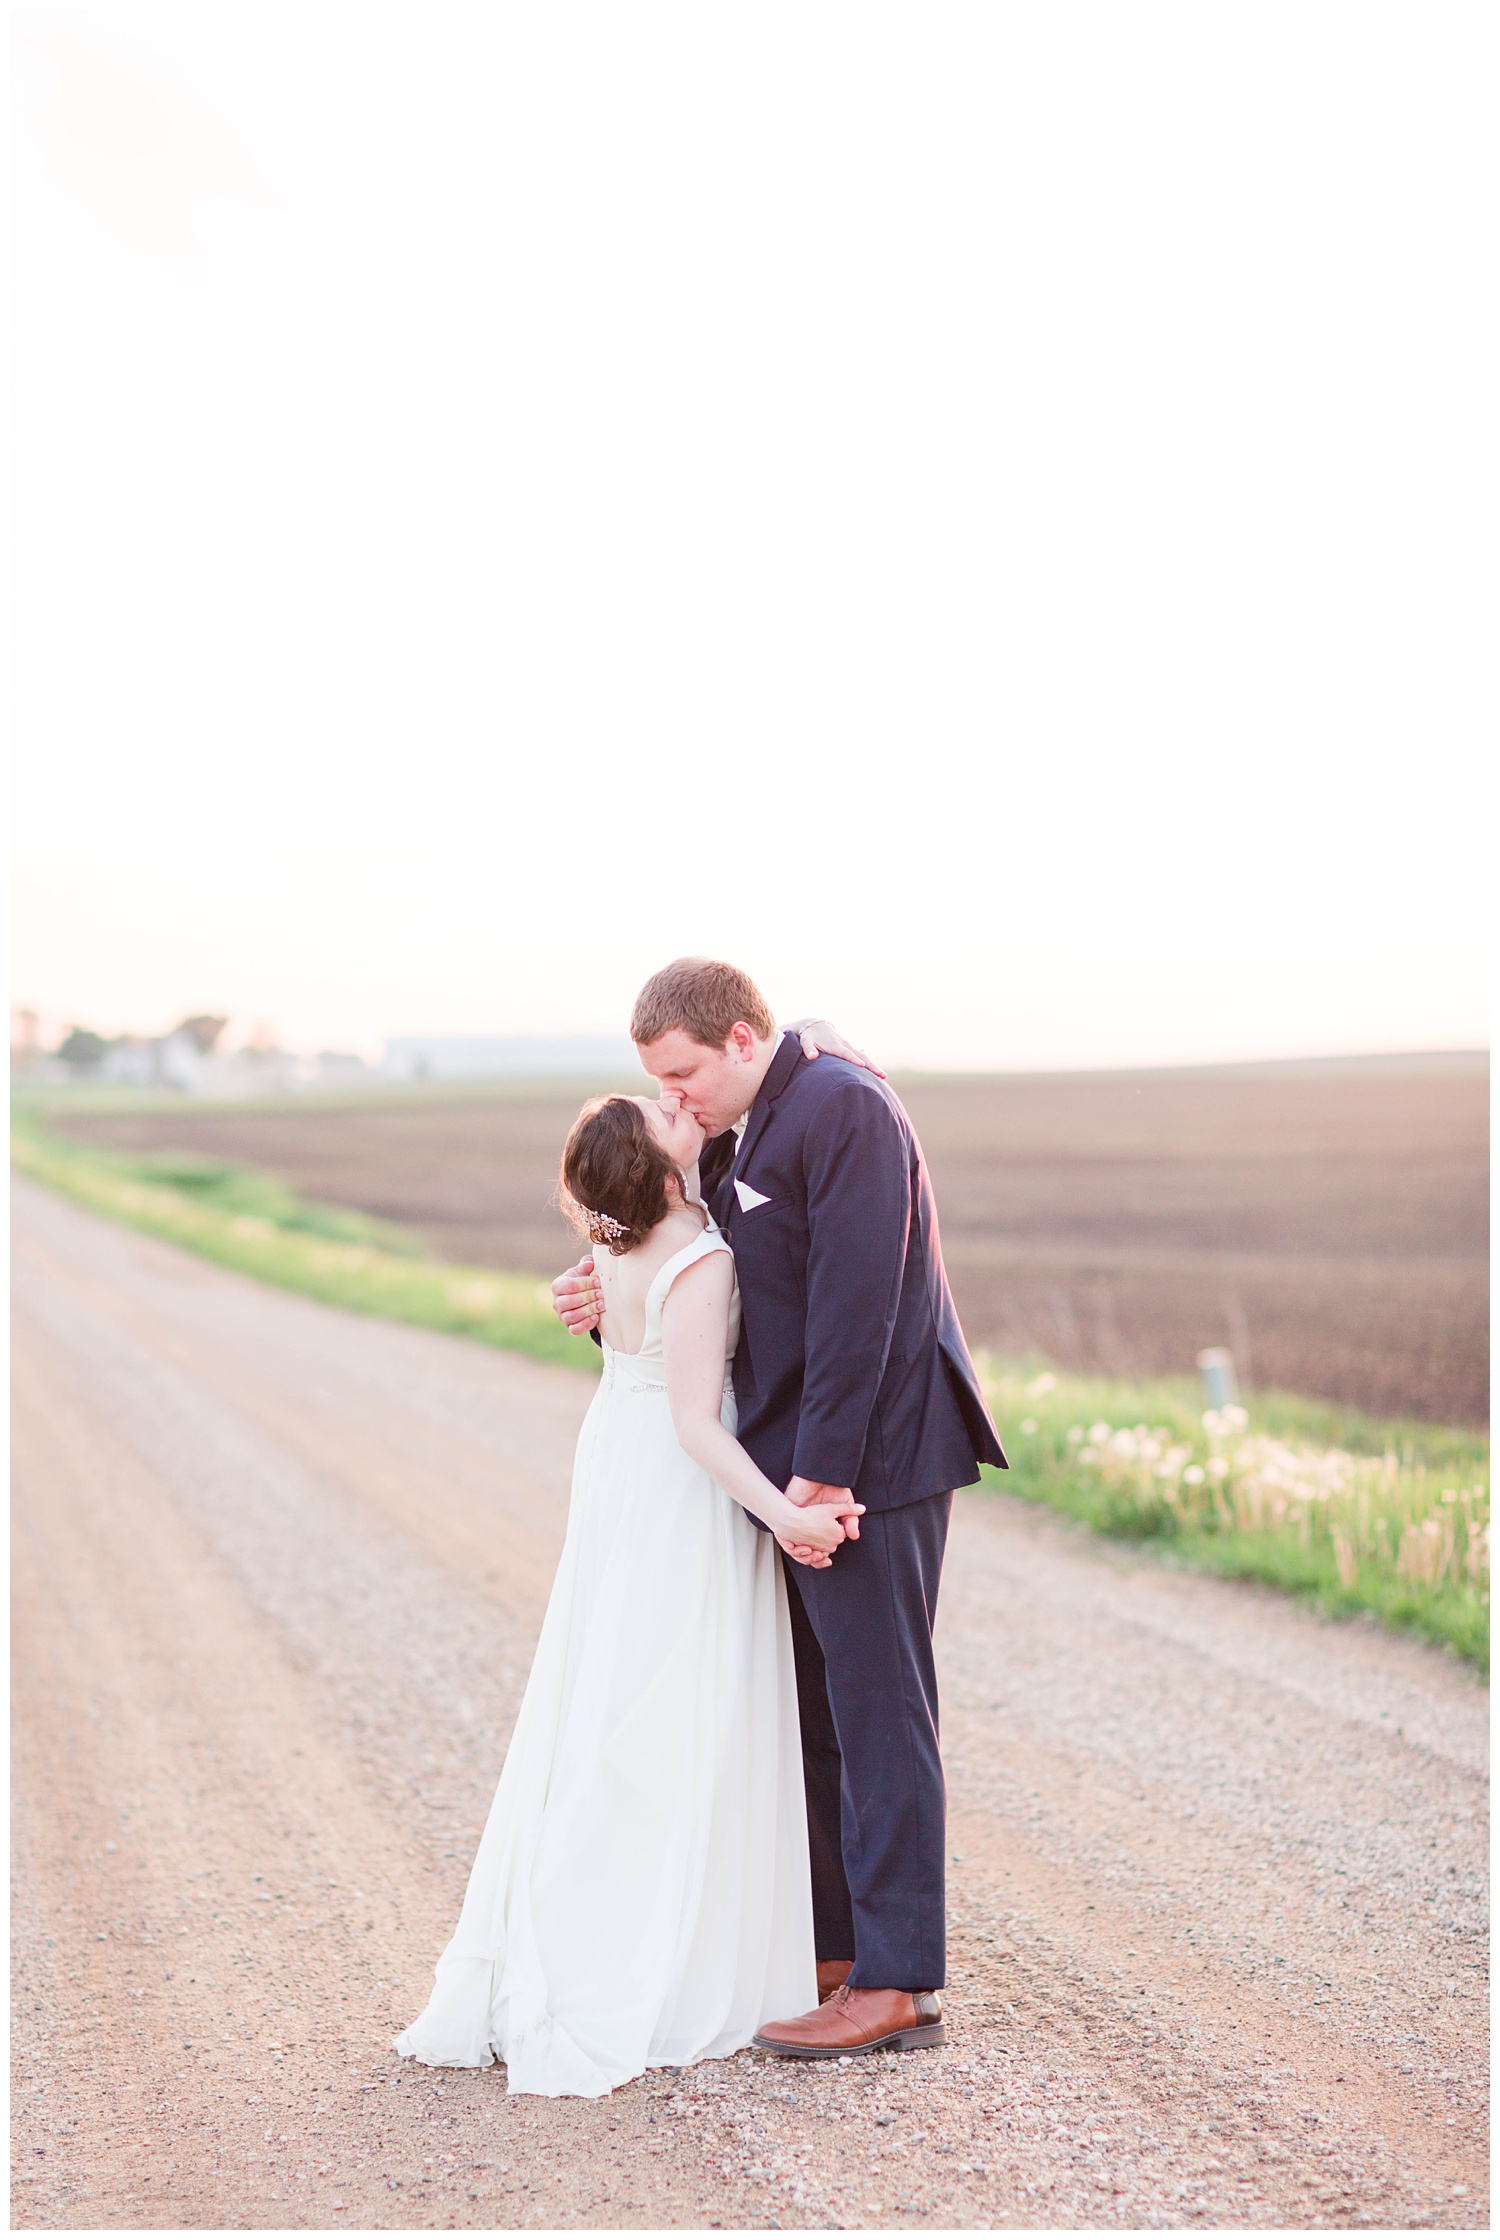 Bride and groom kiss at sunset on a country road in Algona Iowa | CB Studio